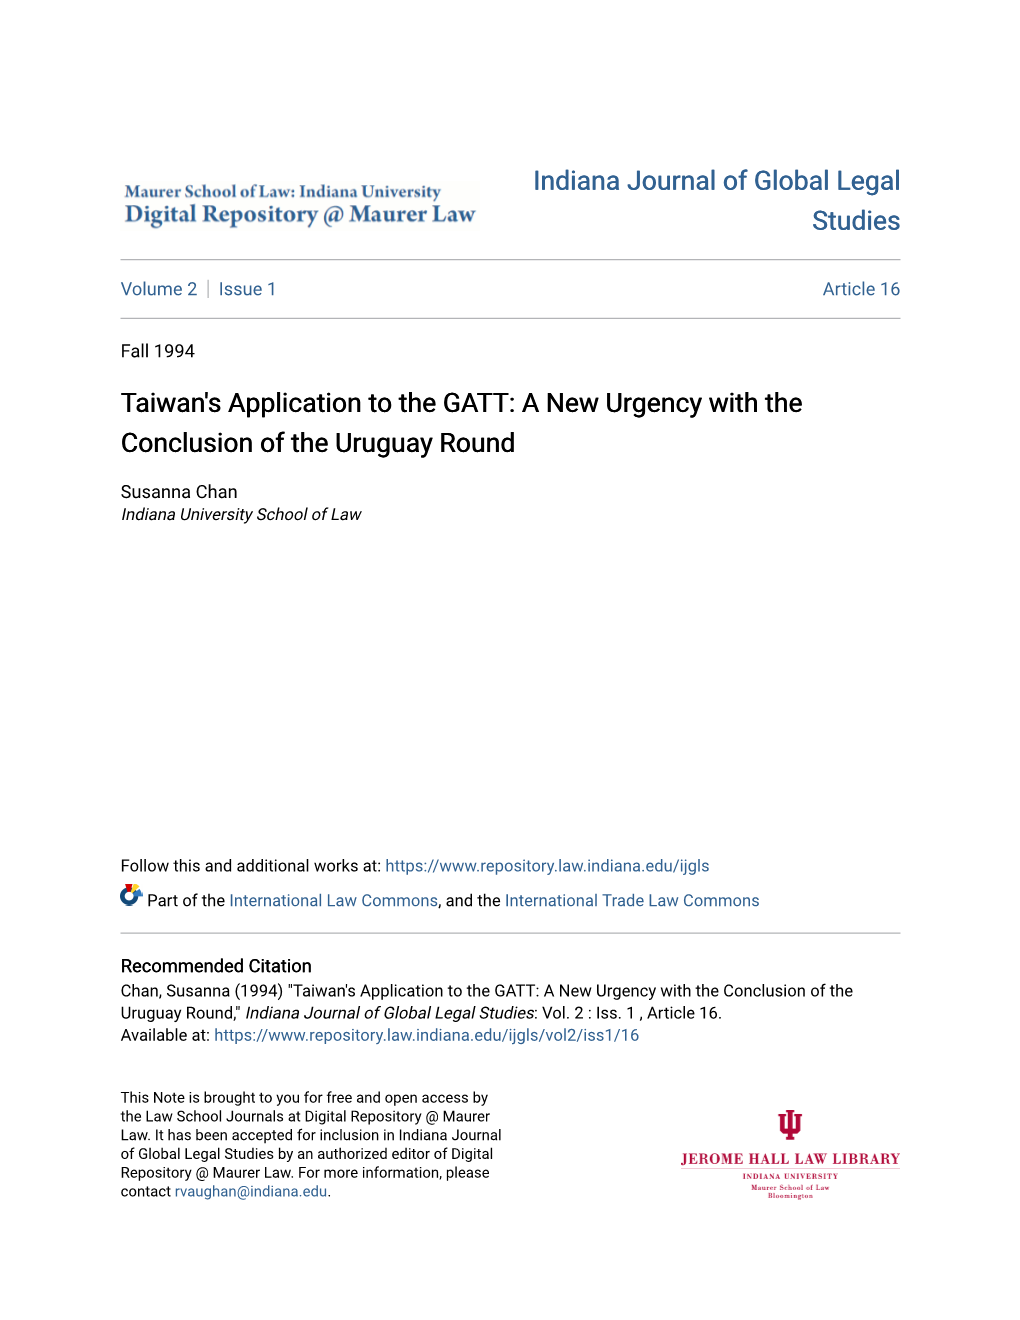 Taiwan's Application to the GATT: a New Urgency with the Conclusion of the Uruguay Round